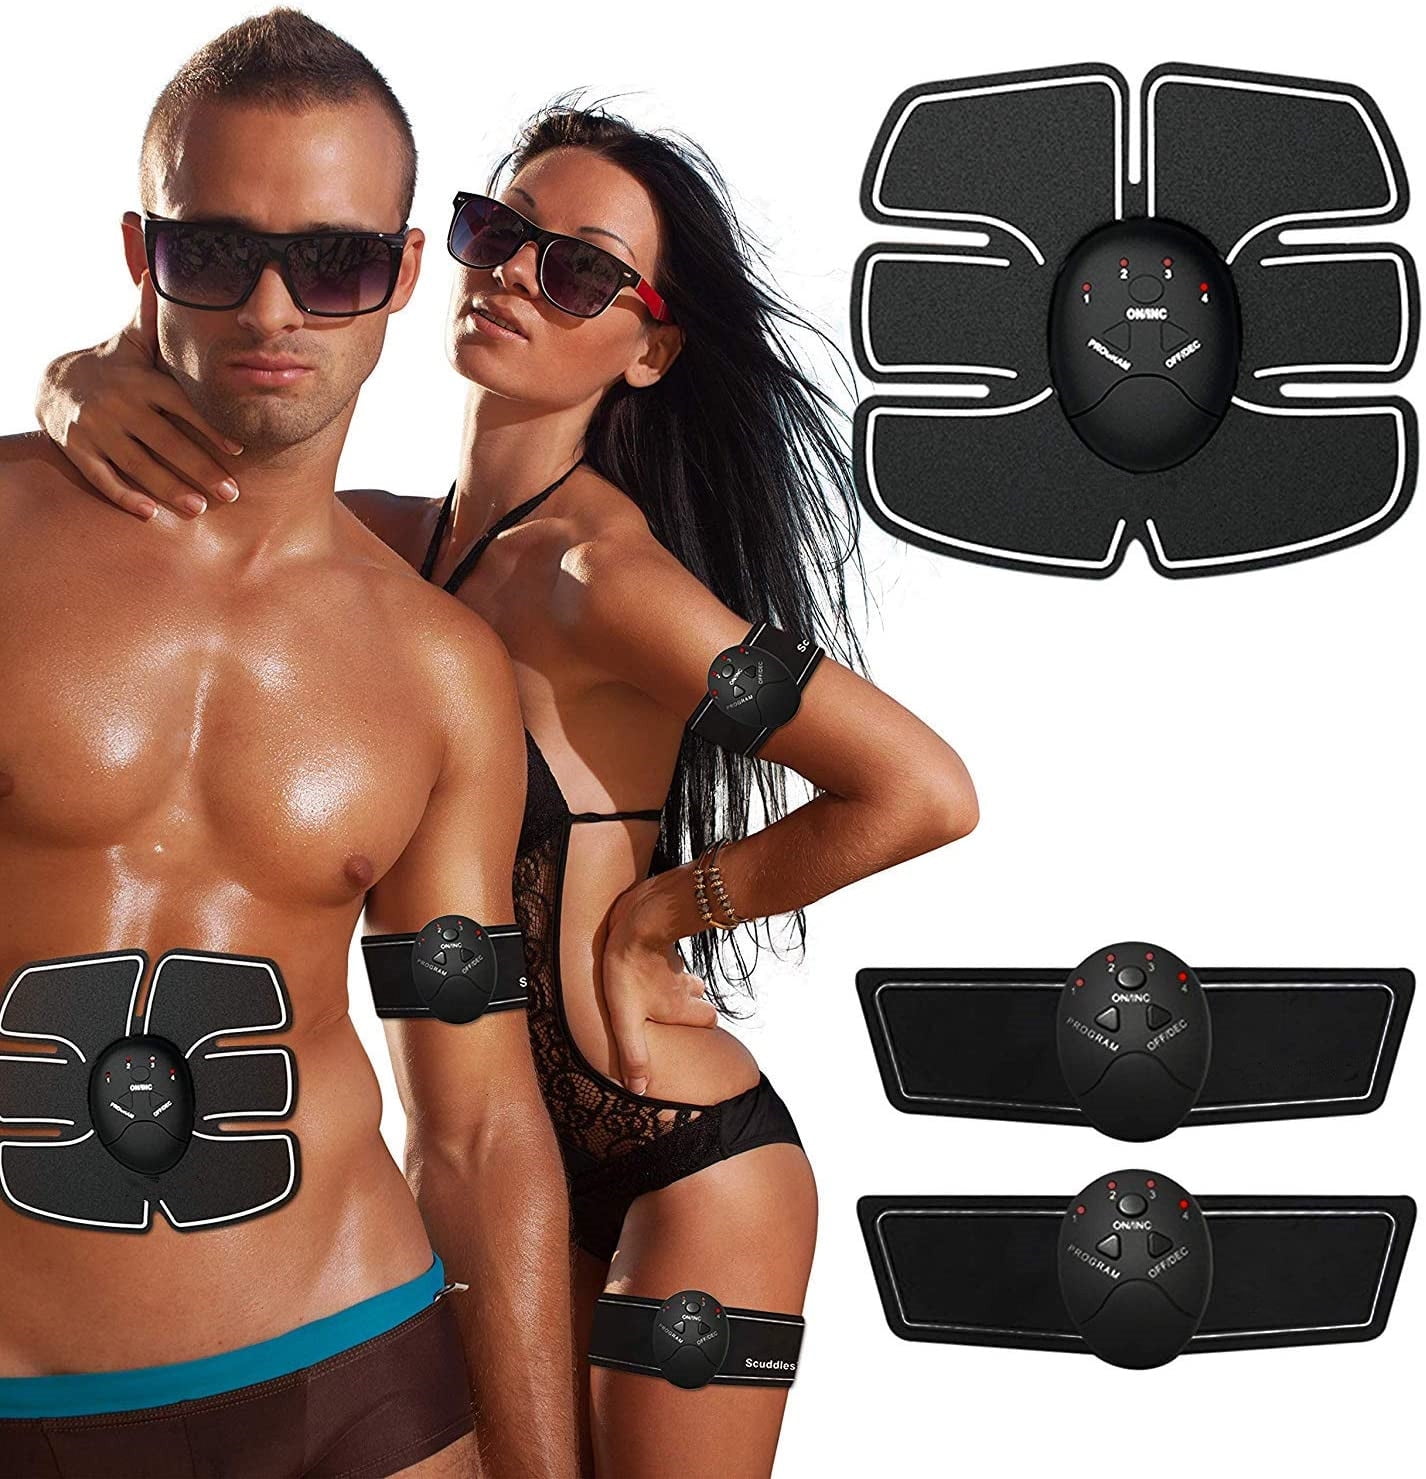 VIP DEAL: Wireless Abs Stimulator and Abdominal Muscle Toning Device + –  Deals Club Canada